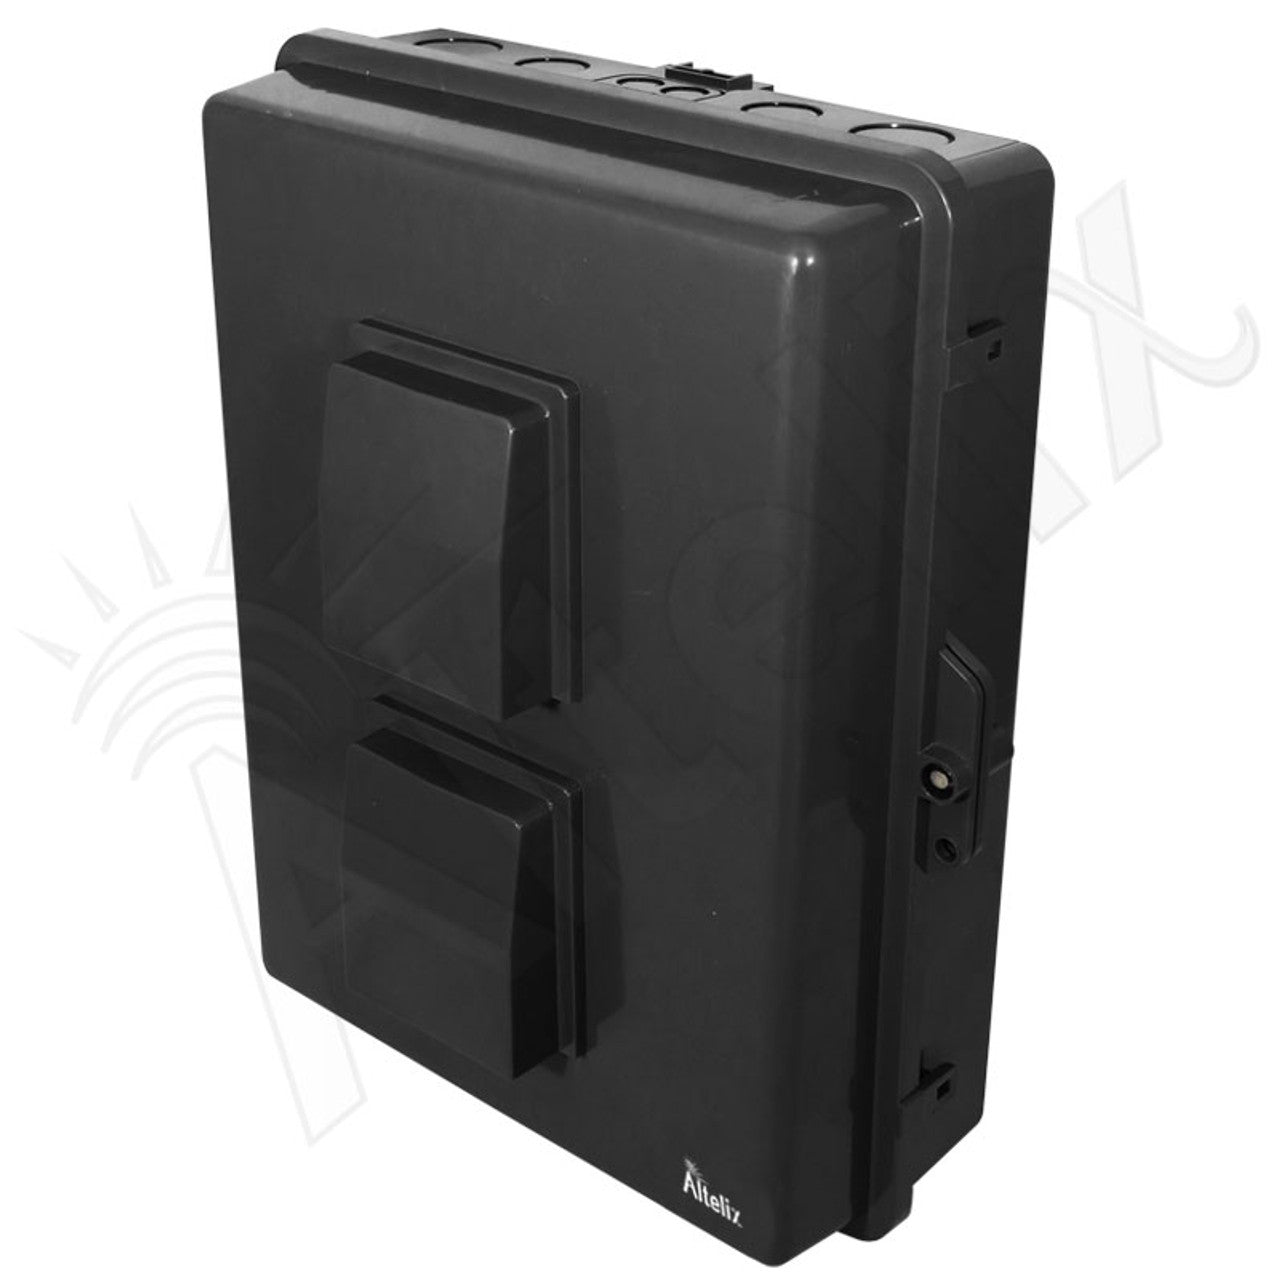 Buy black Altelix 17x14x6 Polycarbonate + ABS Vented Weatherproof NEMA Enclosure with Aluminum Mounting Plate, 120 VAC GFCI Outlets &amp; Power Cord